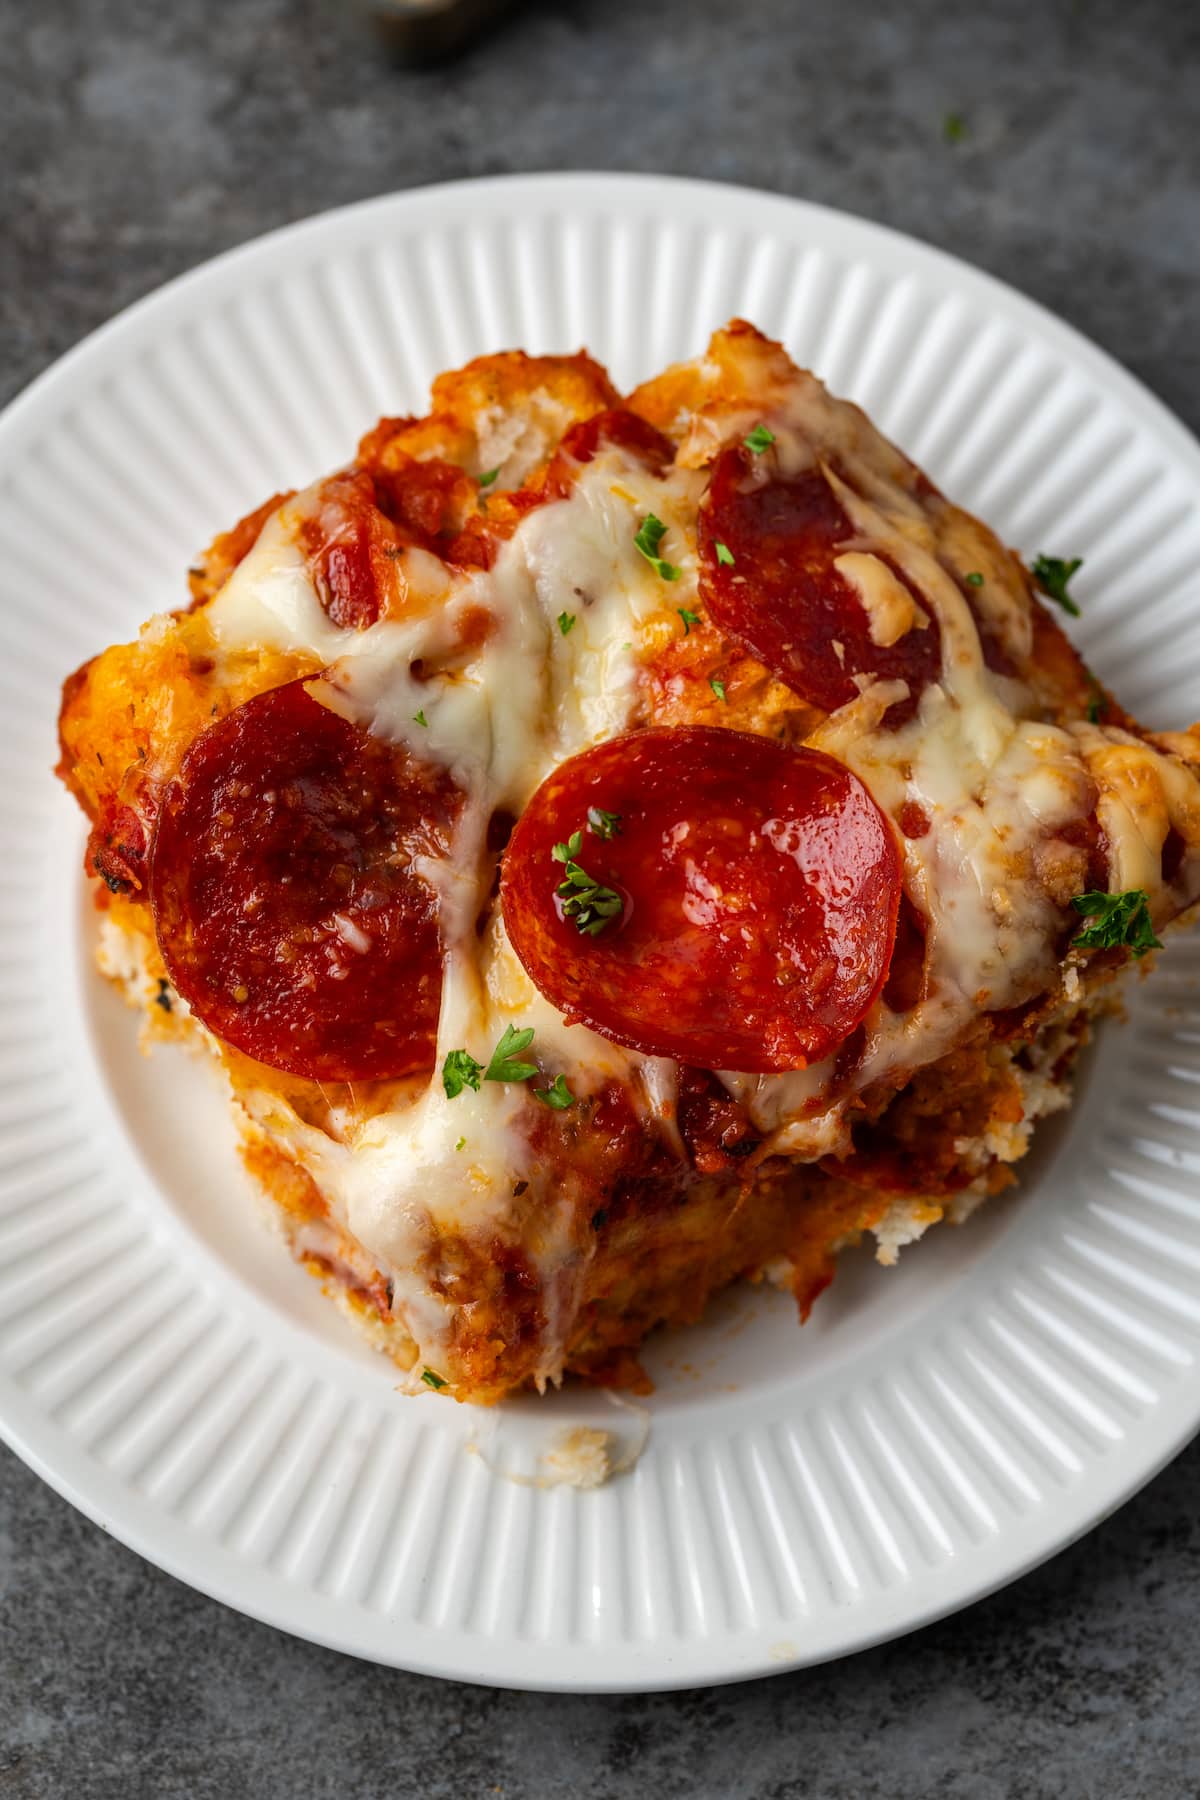 Overhead view of a serving of pizza casserole on a white plate.